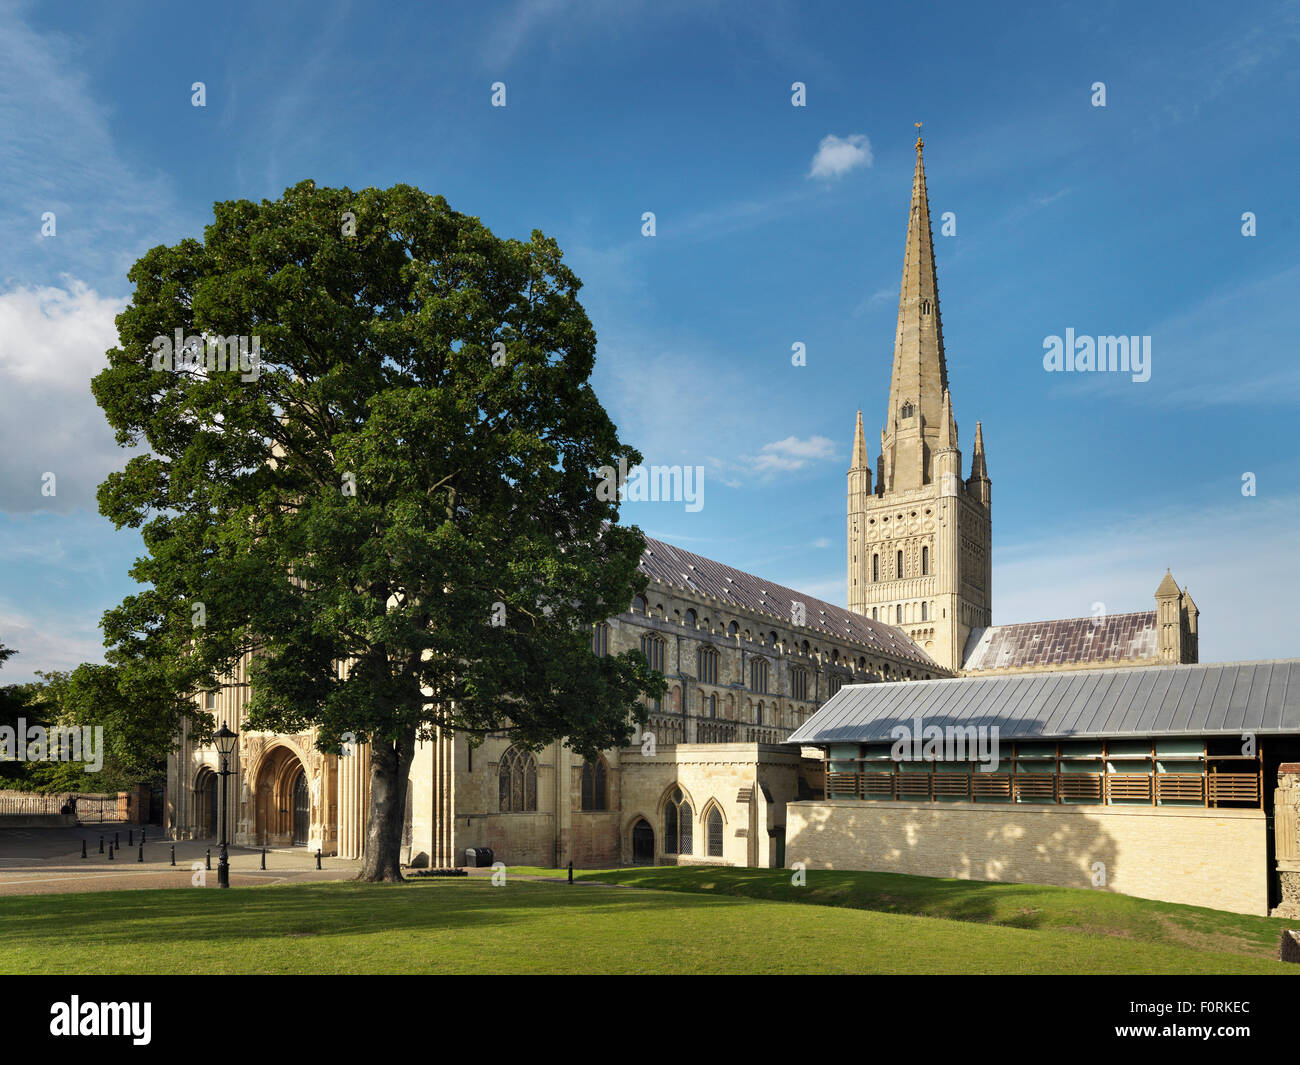 Shot of Norwich cathedral in the English city of Norwich. Stock Photo